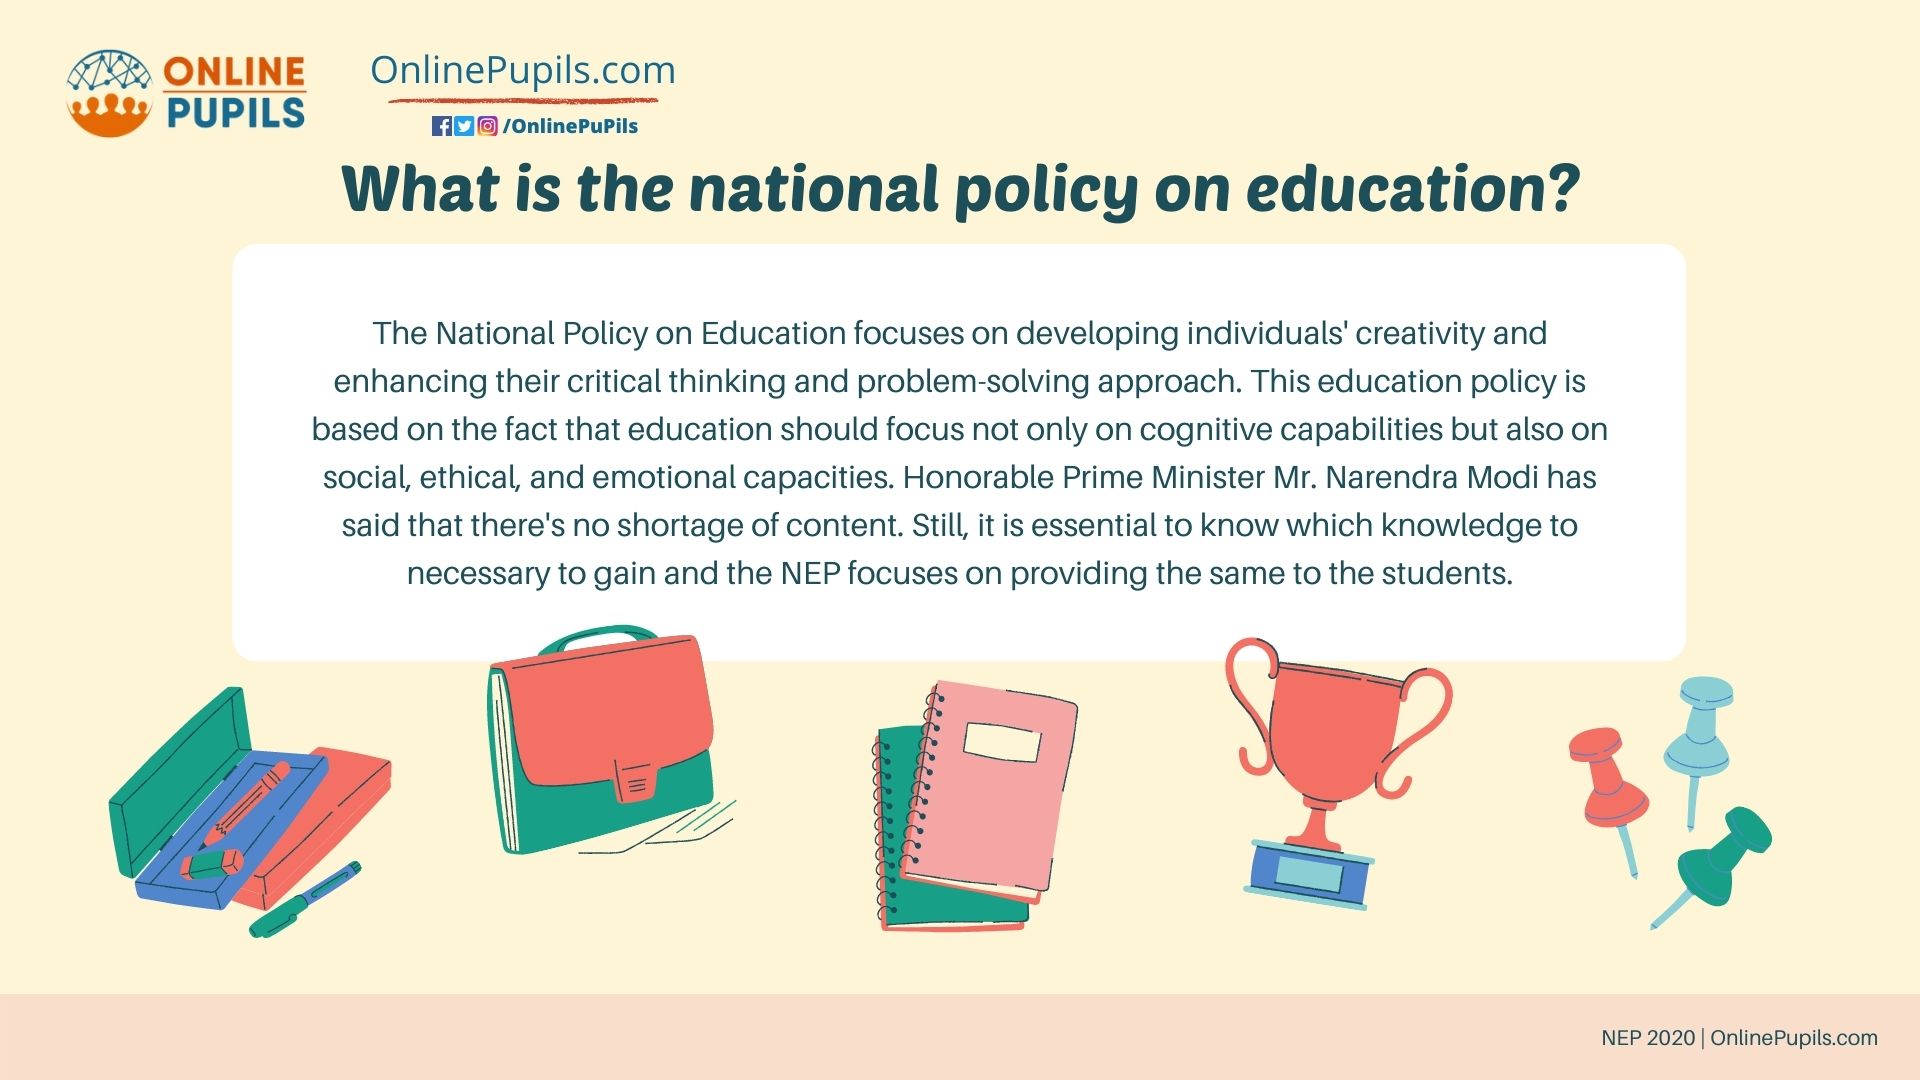 National Education Policy 2020